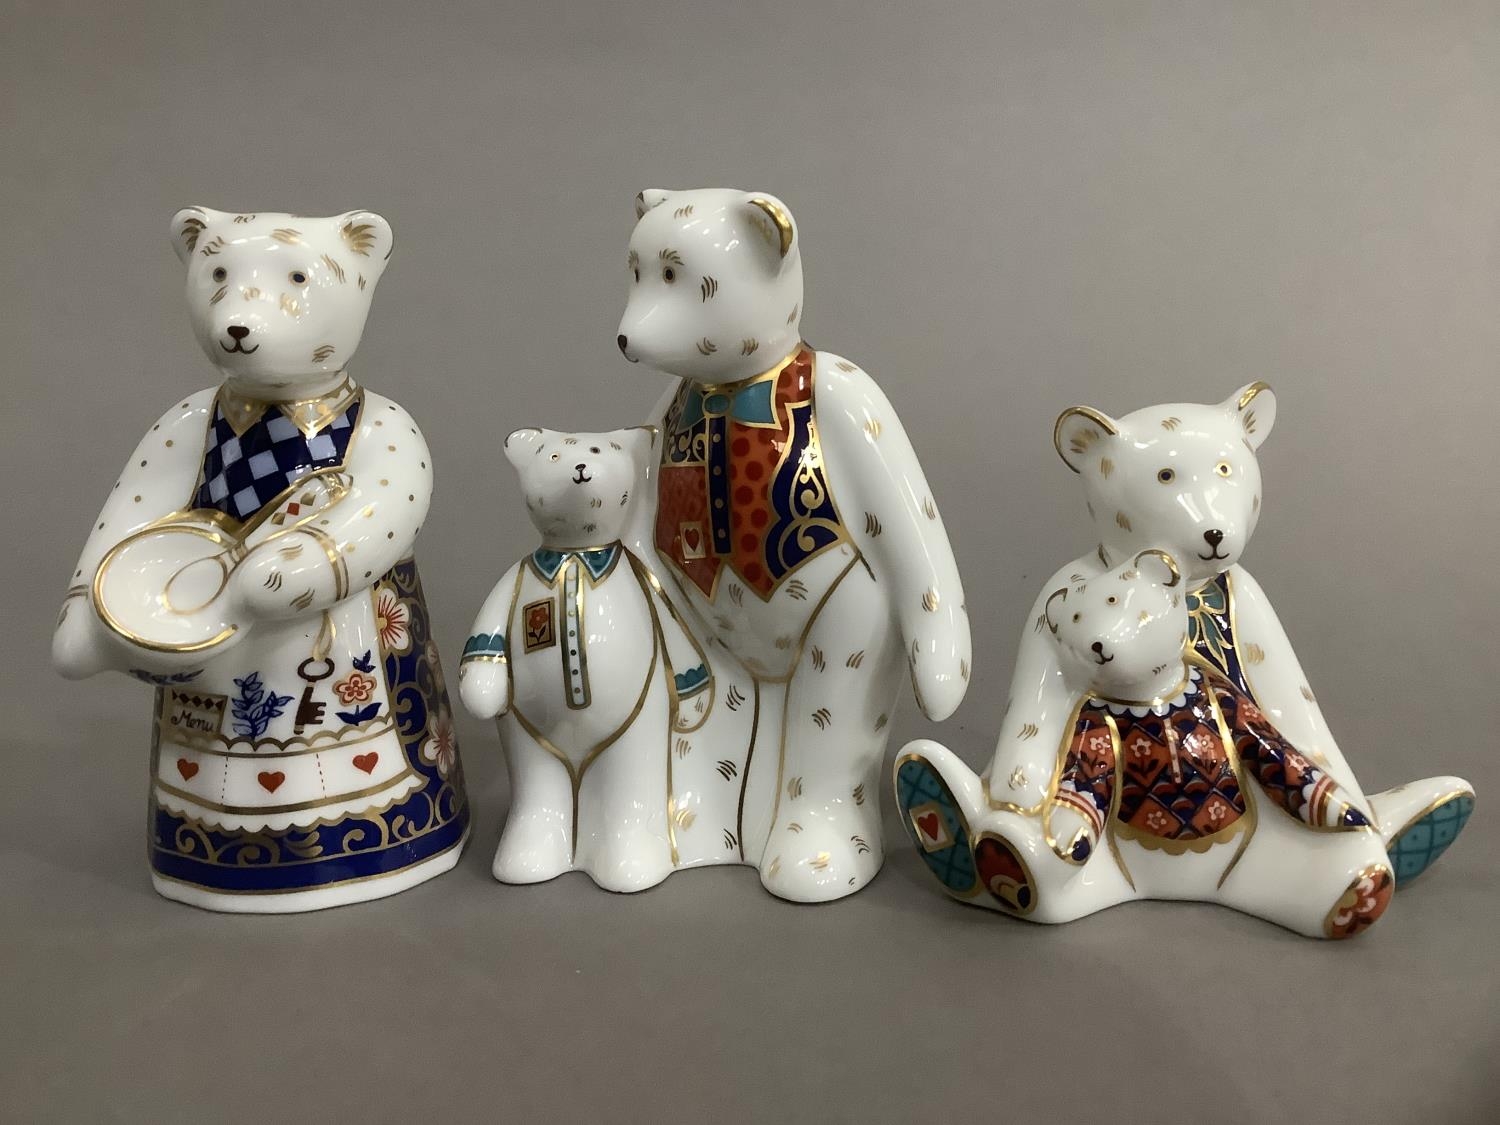 A Royal Crown Derby family group of teddy bears including mother bear, father bear with young and - Image 2 of 4